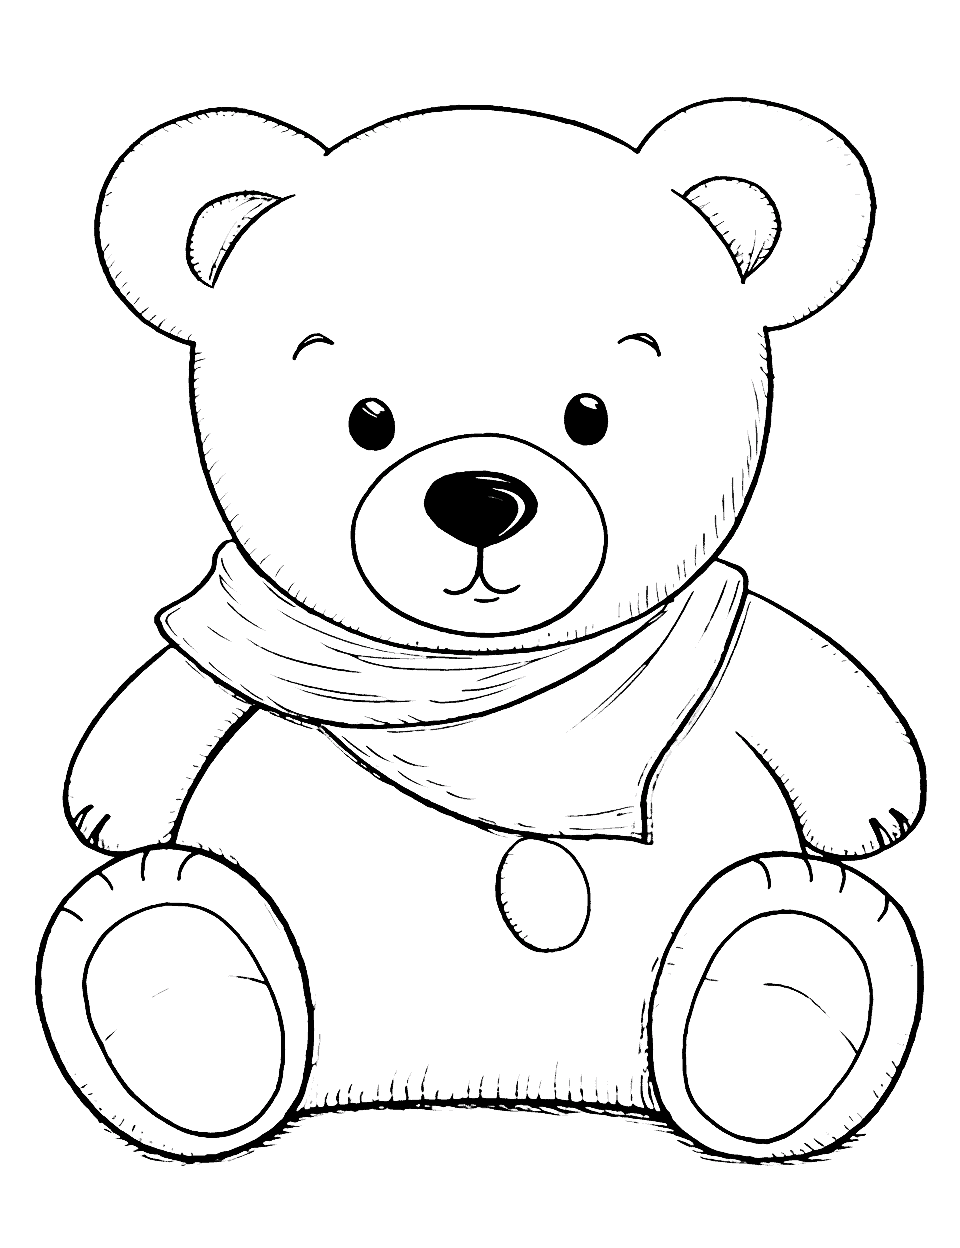 Cute Teddy Bear Coloring Page - A teddy bear peacefully sitting on the floor with a blanket wrapped around the shoulders.